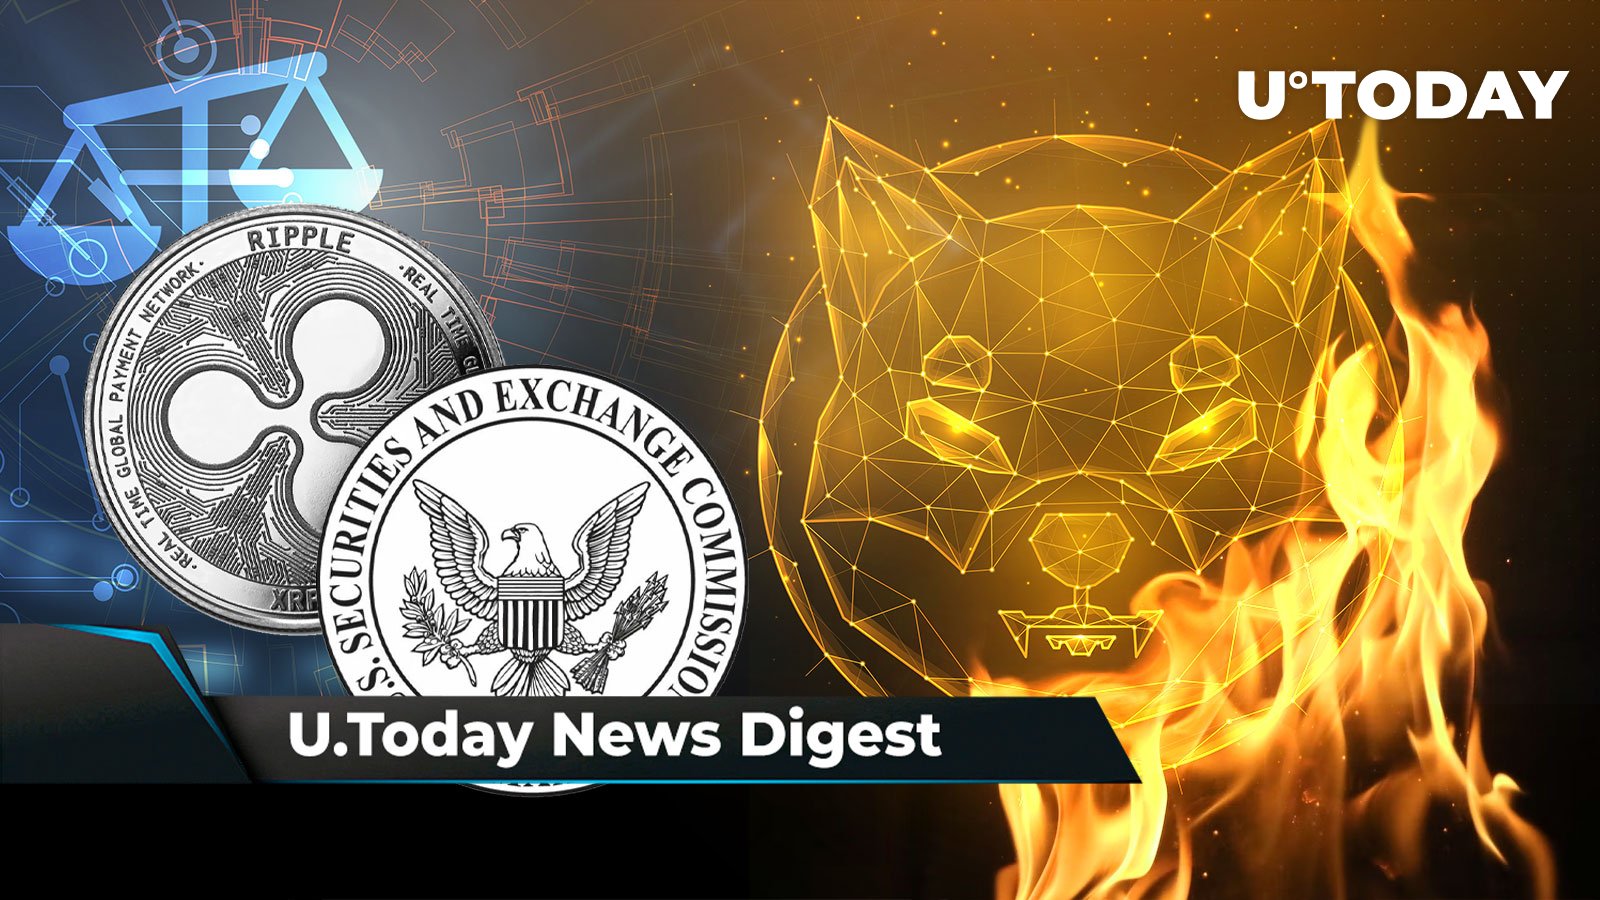 Ripple-SEC Settlement Possible, SHIB Burn Rate Spikes 1,082%, New York Partially Bans Crypto Mining: Crypto News Digest by U.Today